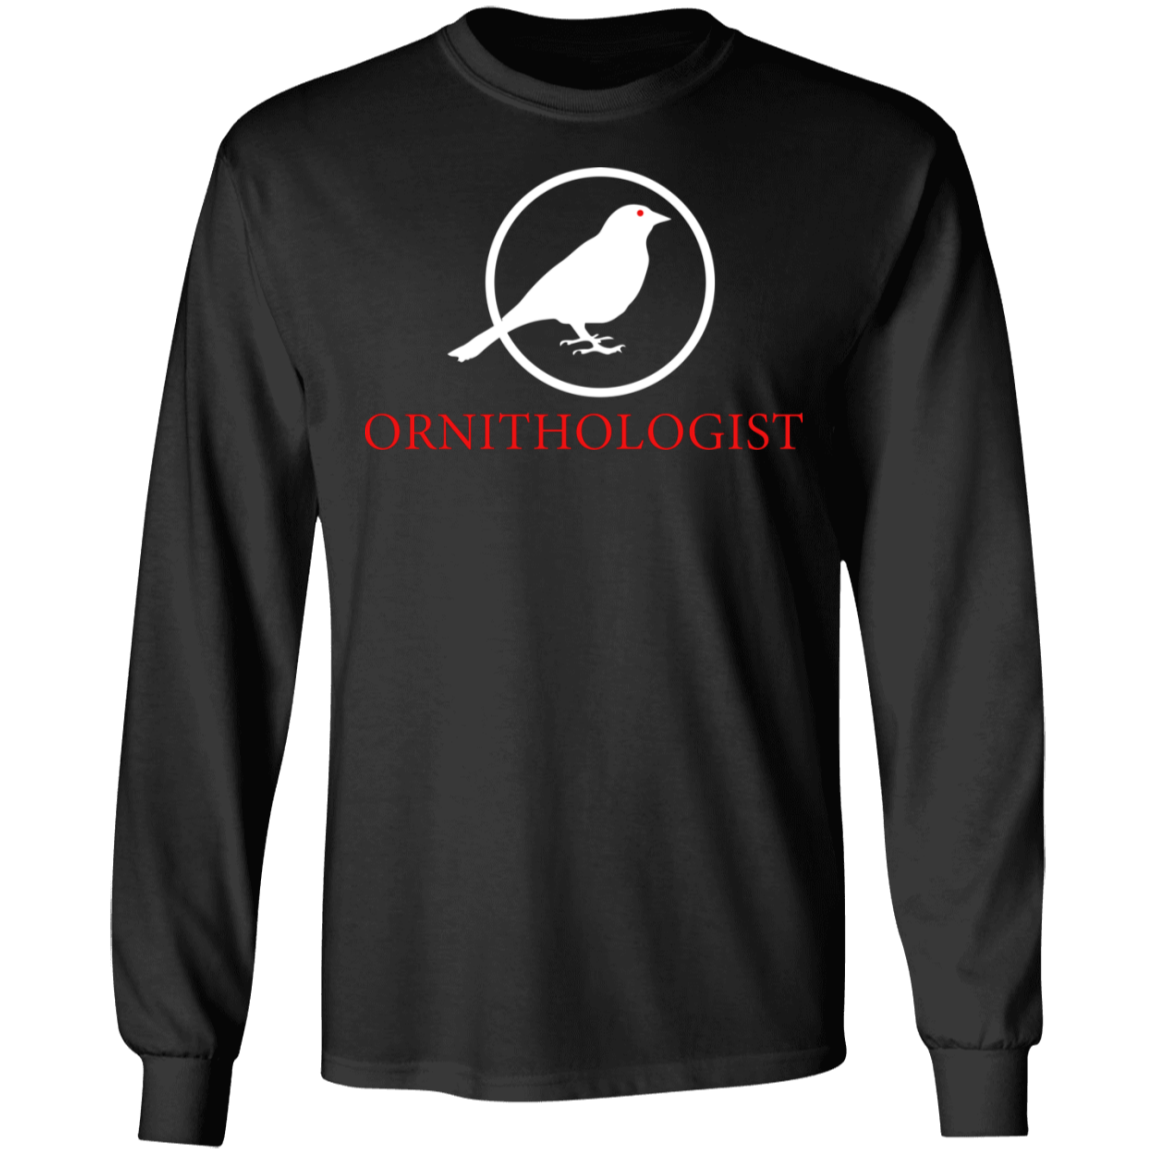 OPG Custom Design # 24. Ornithologist. A person who studies or is an expert on birds. 100% Cotton Long Sleeve T-Shirt